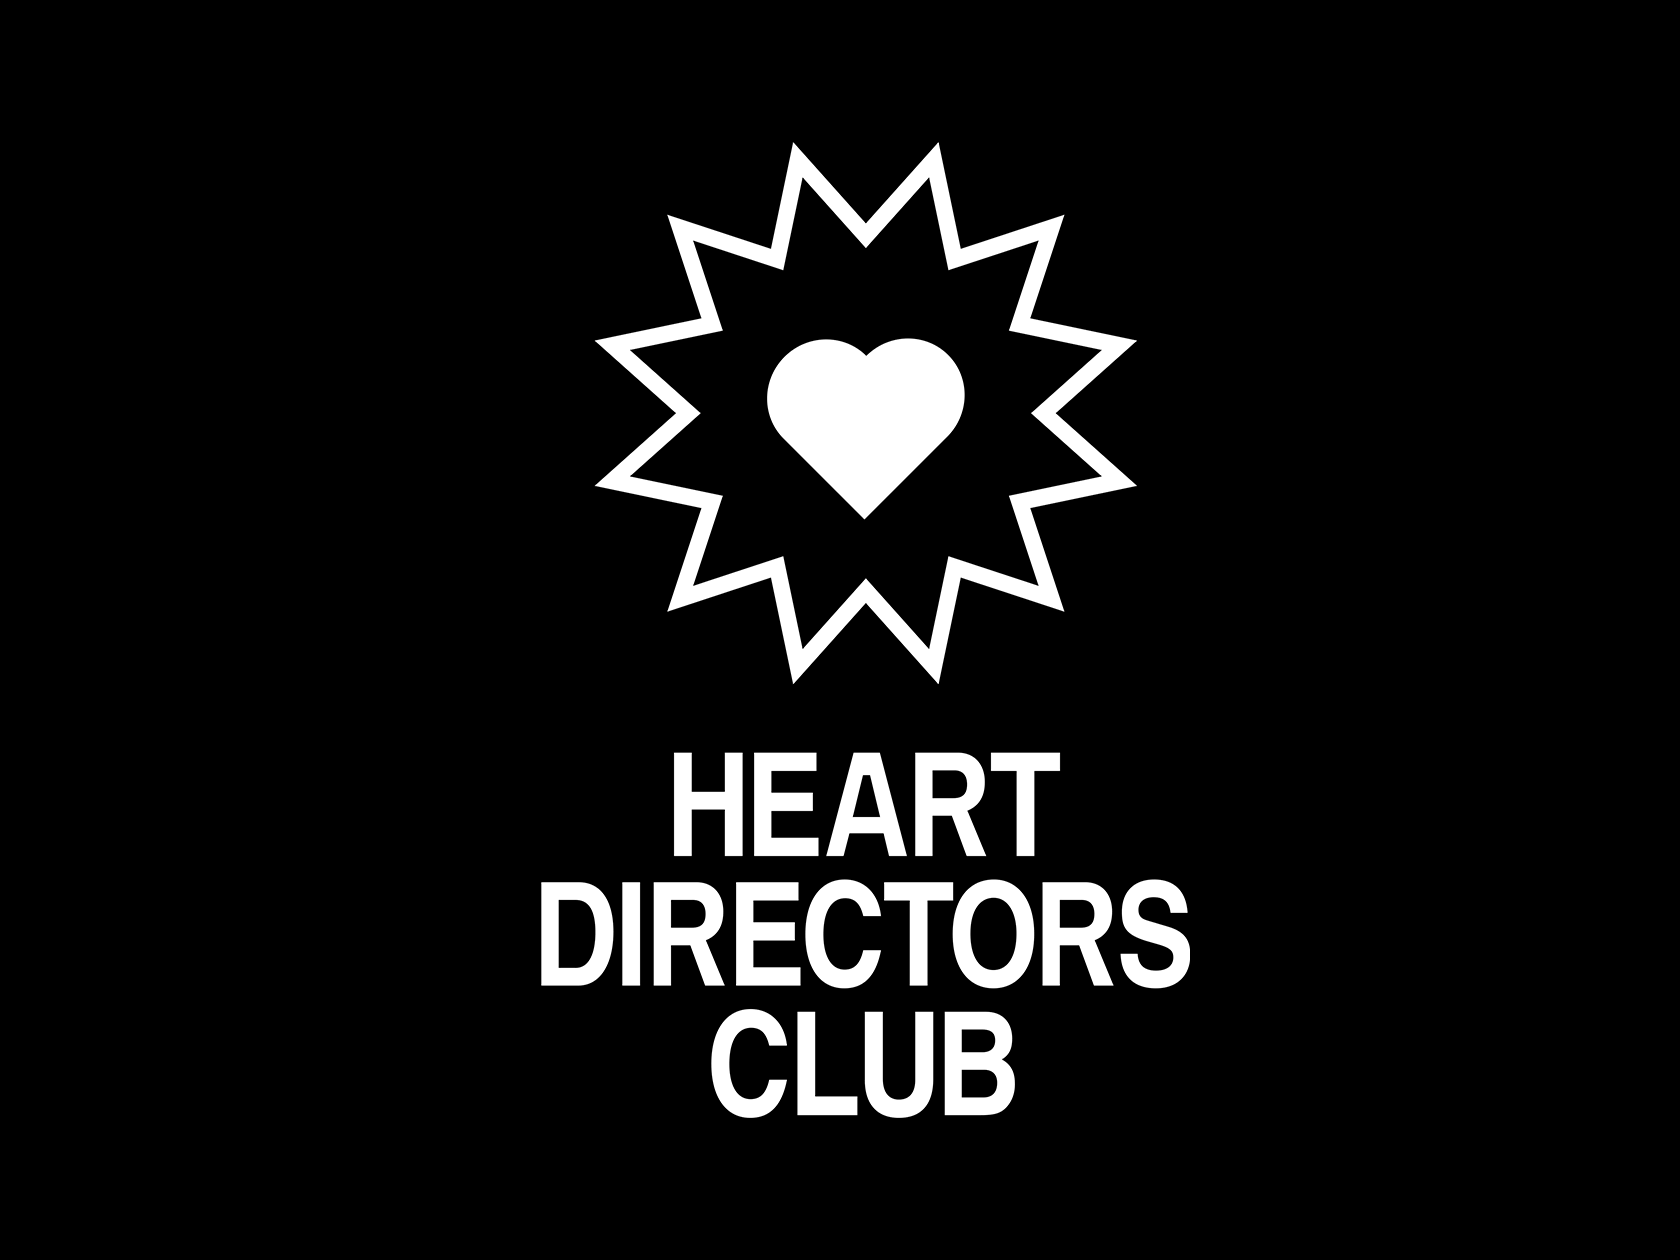 Nikolai Dobreff on his vision behind Heart Directors Club, a collaborative initiative using design as a tool to support charities